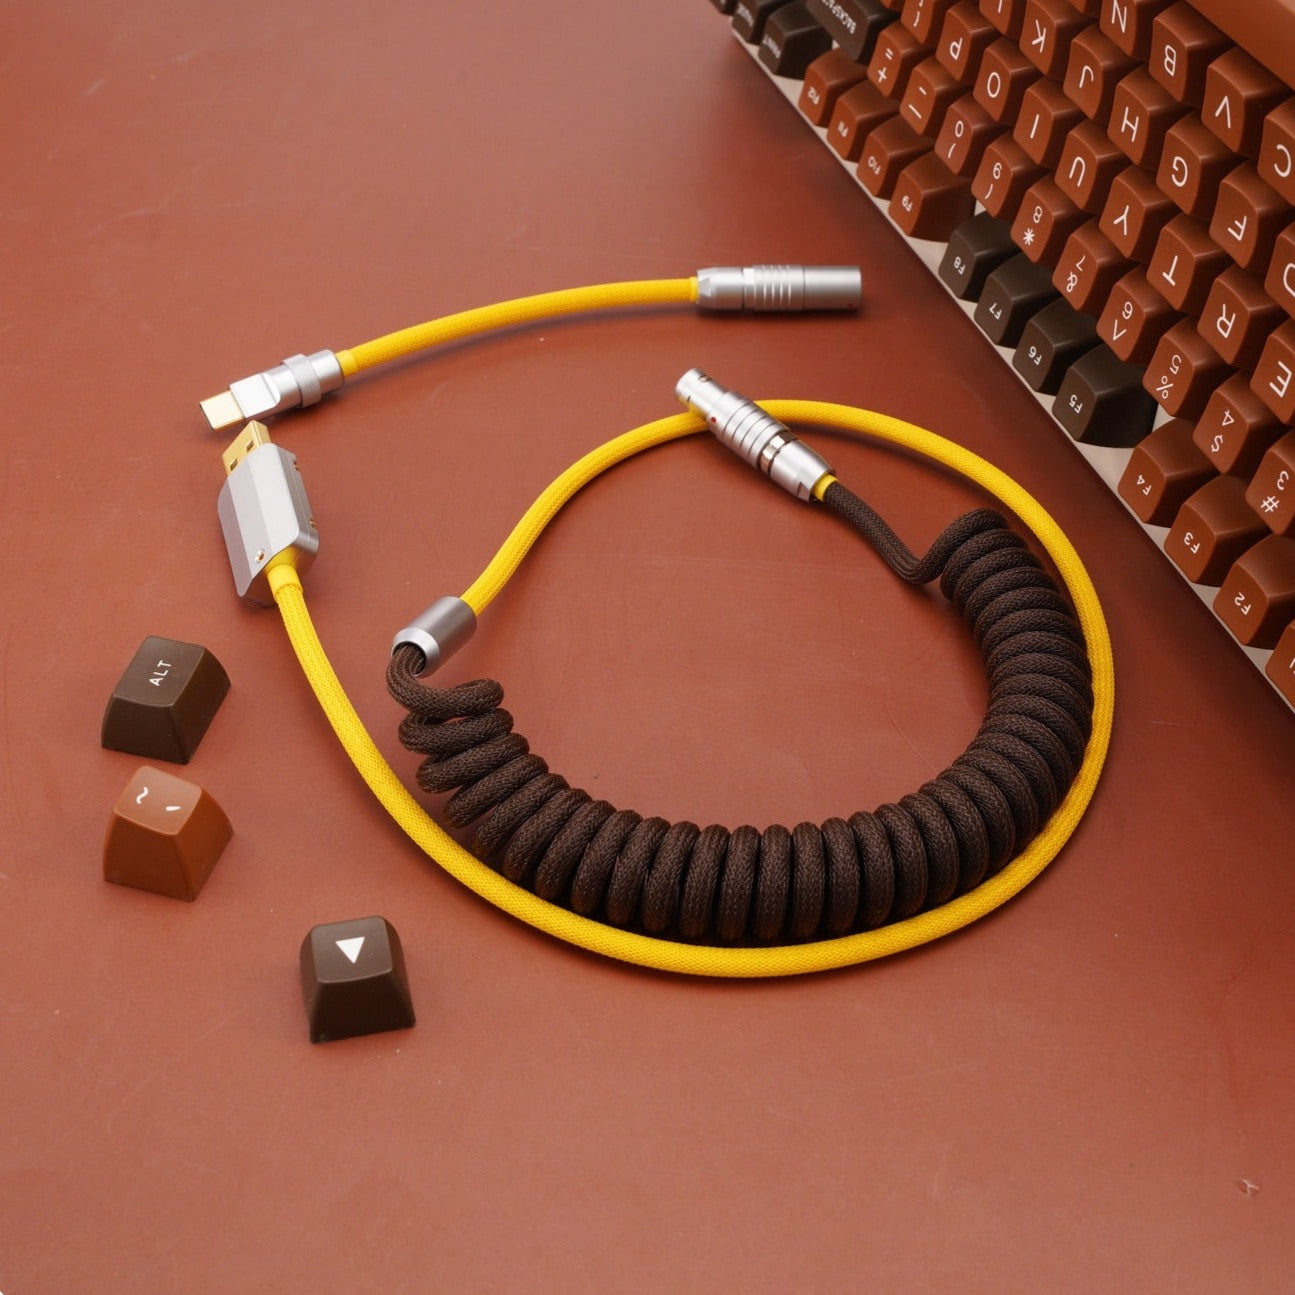 Sleeved Coiled Keyboard Aviator Cable, Lemo Style Connector - Brown/Yellow